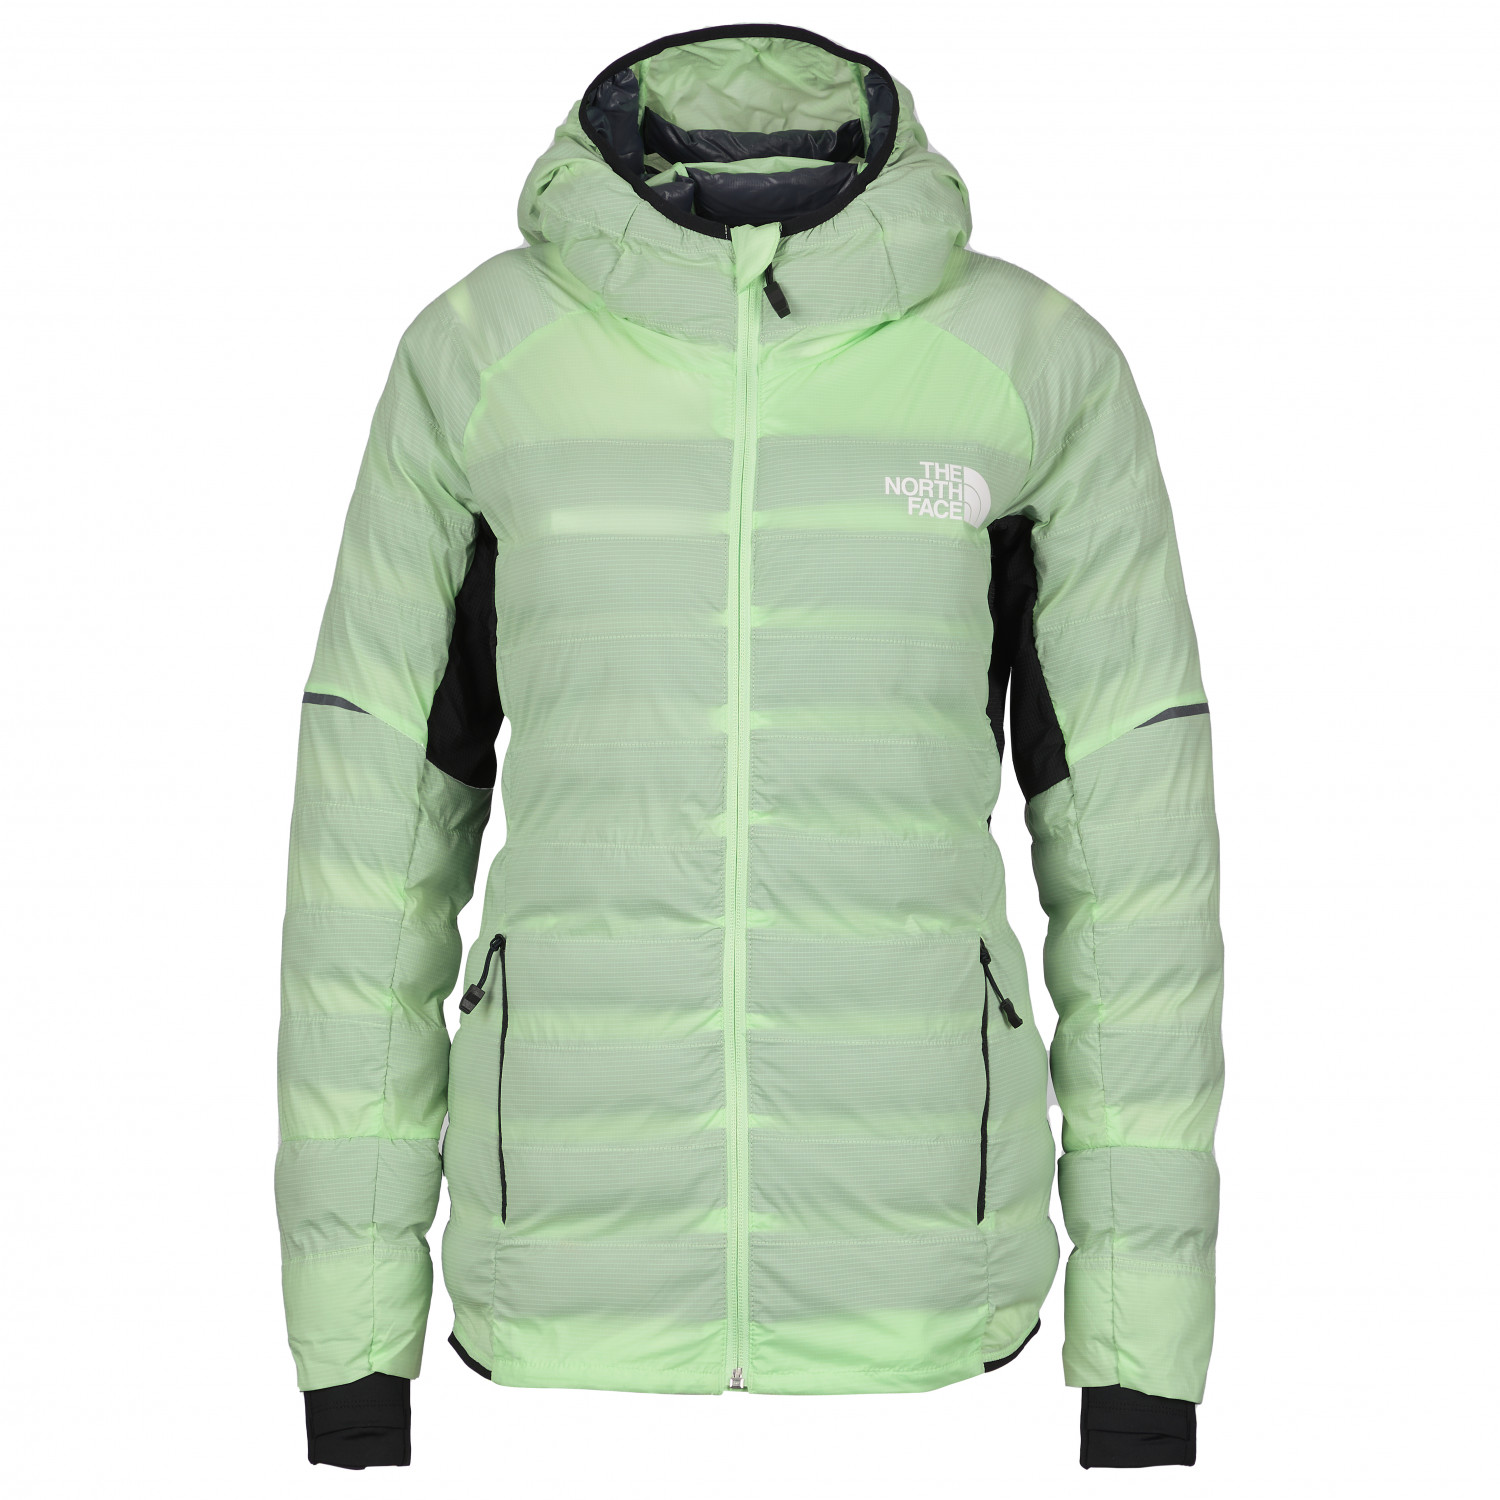 The North Face - Women's Dawn Turn 50/50 Synthetic - Kunstfaserjacke